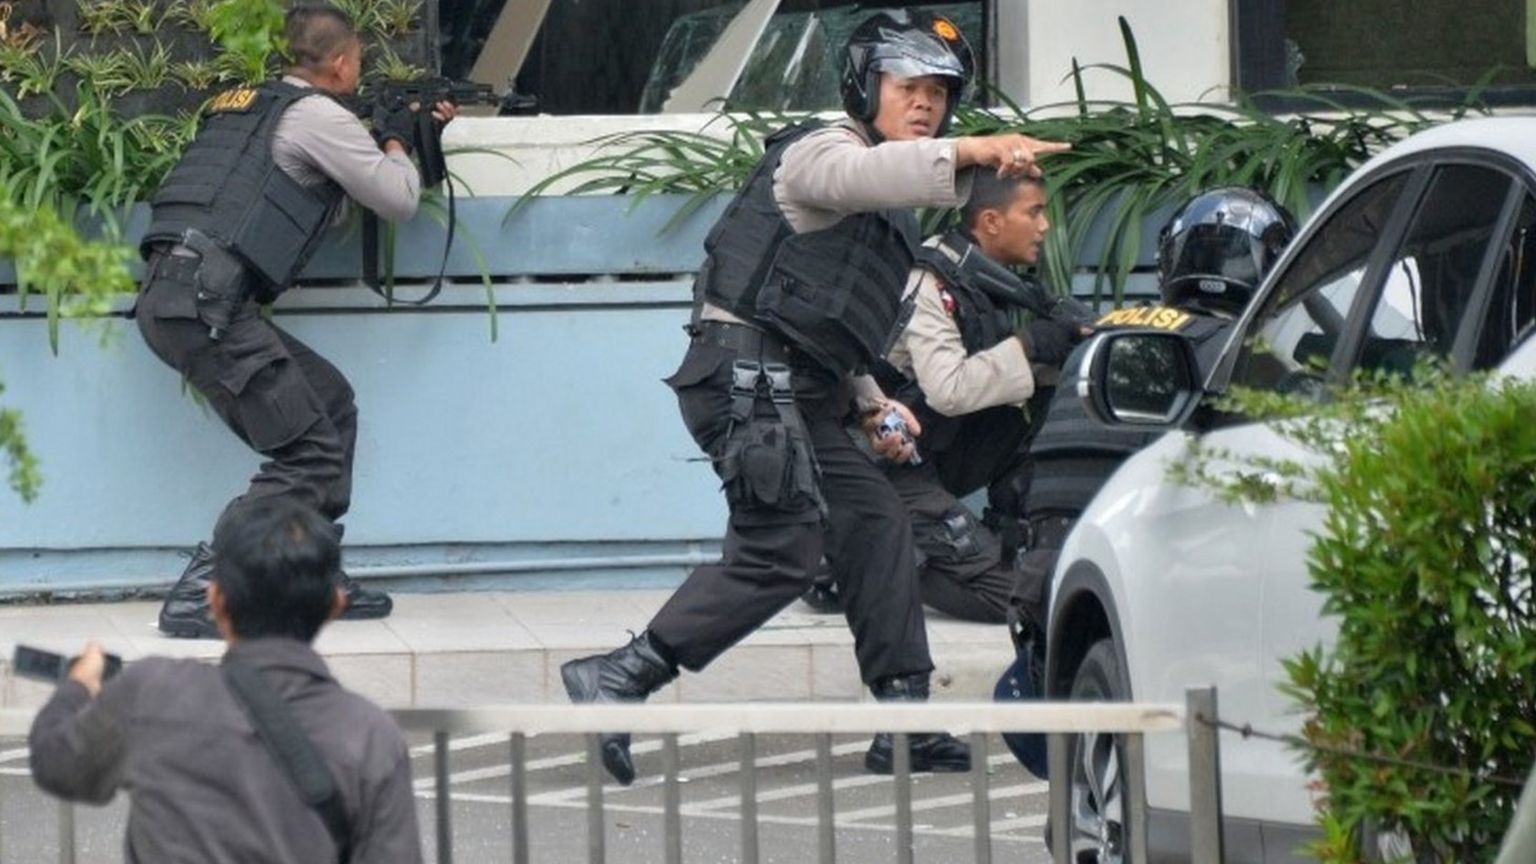 Indonesian police take position and aim their weapons as they pursue suspects in Jakarta